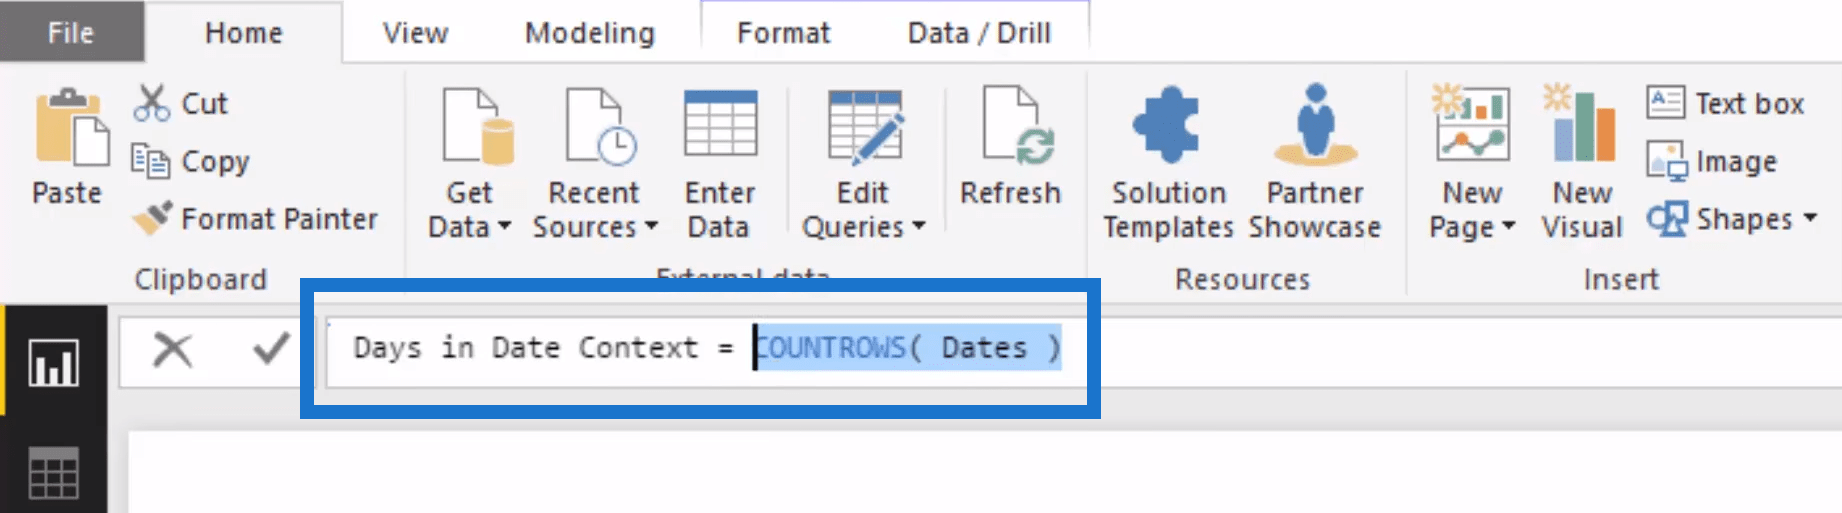 Days in Date Context COUNTROWS in Power BI